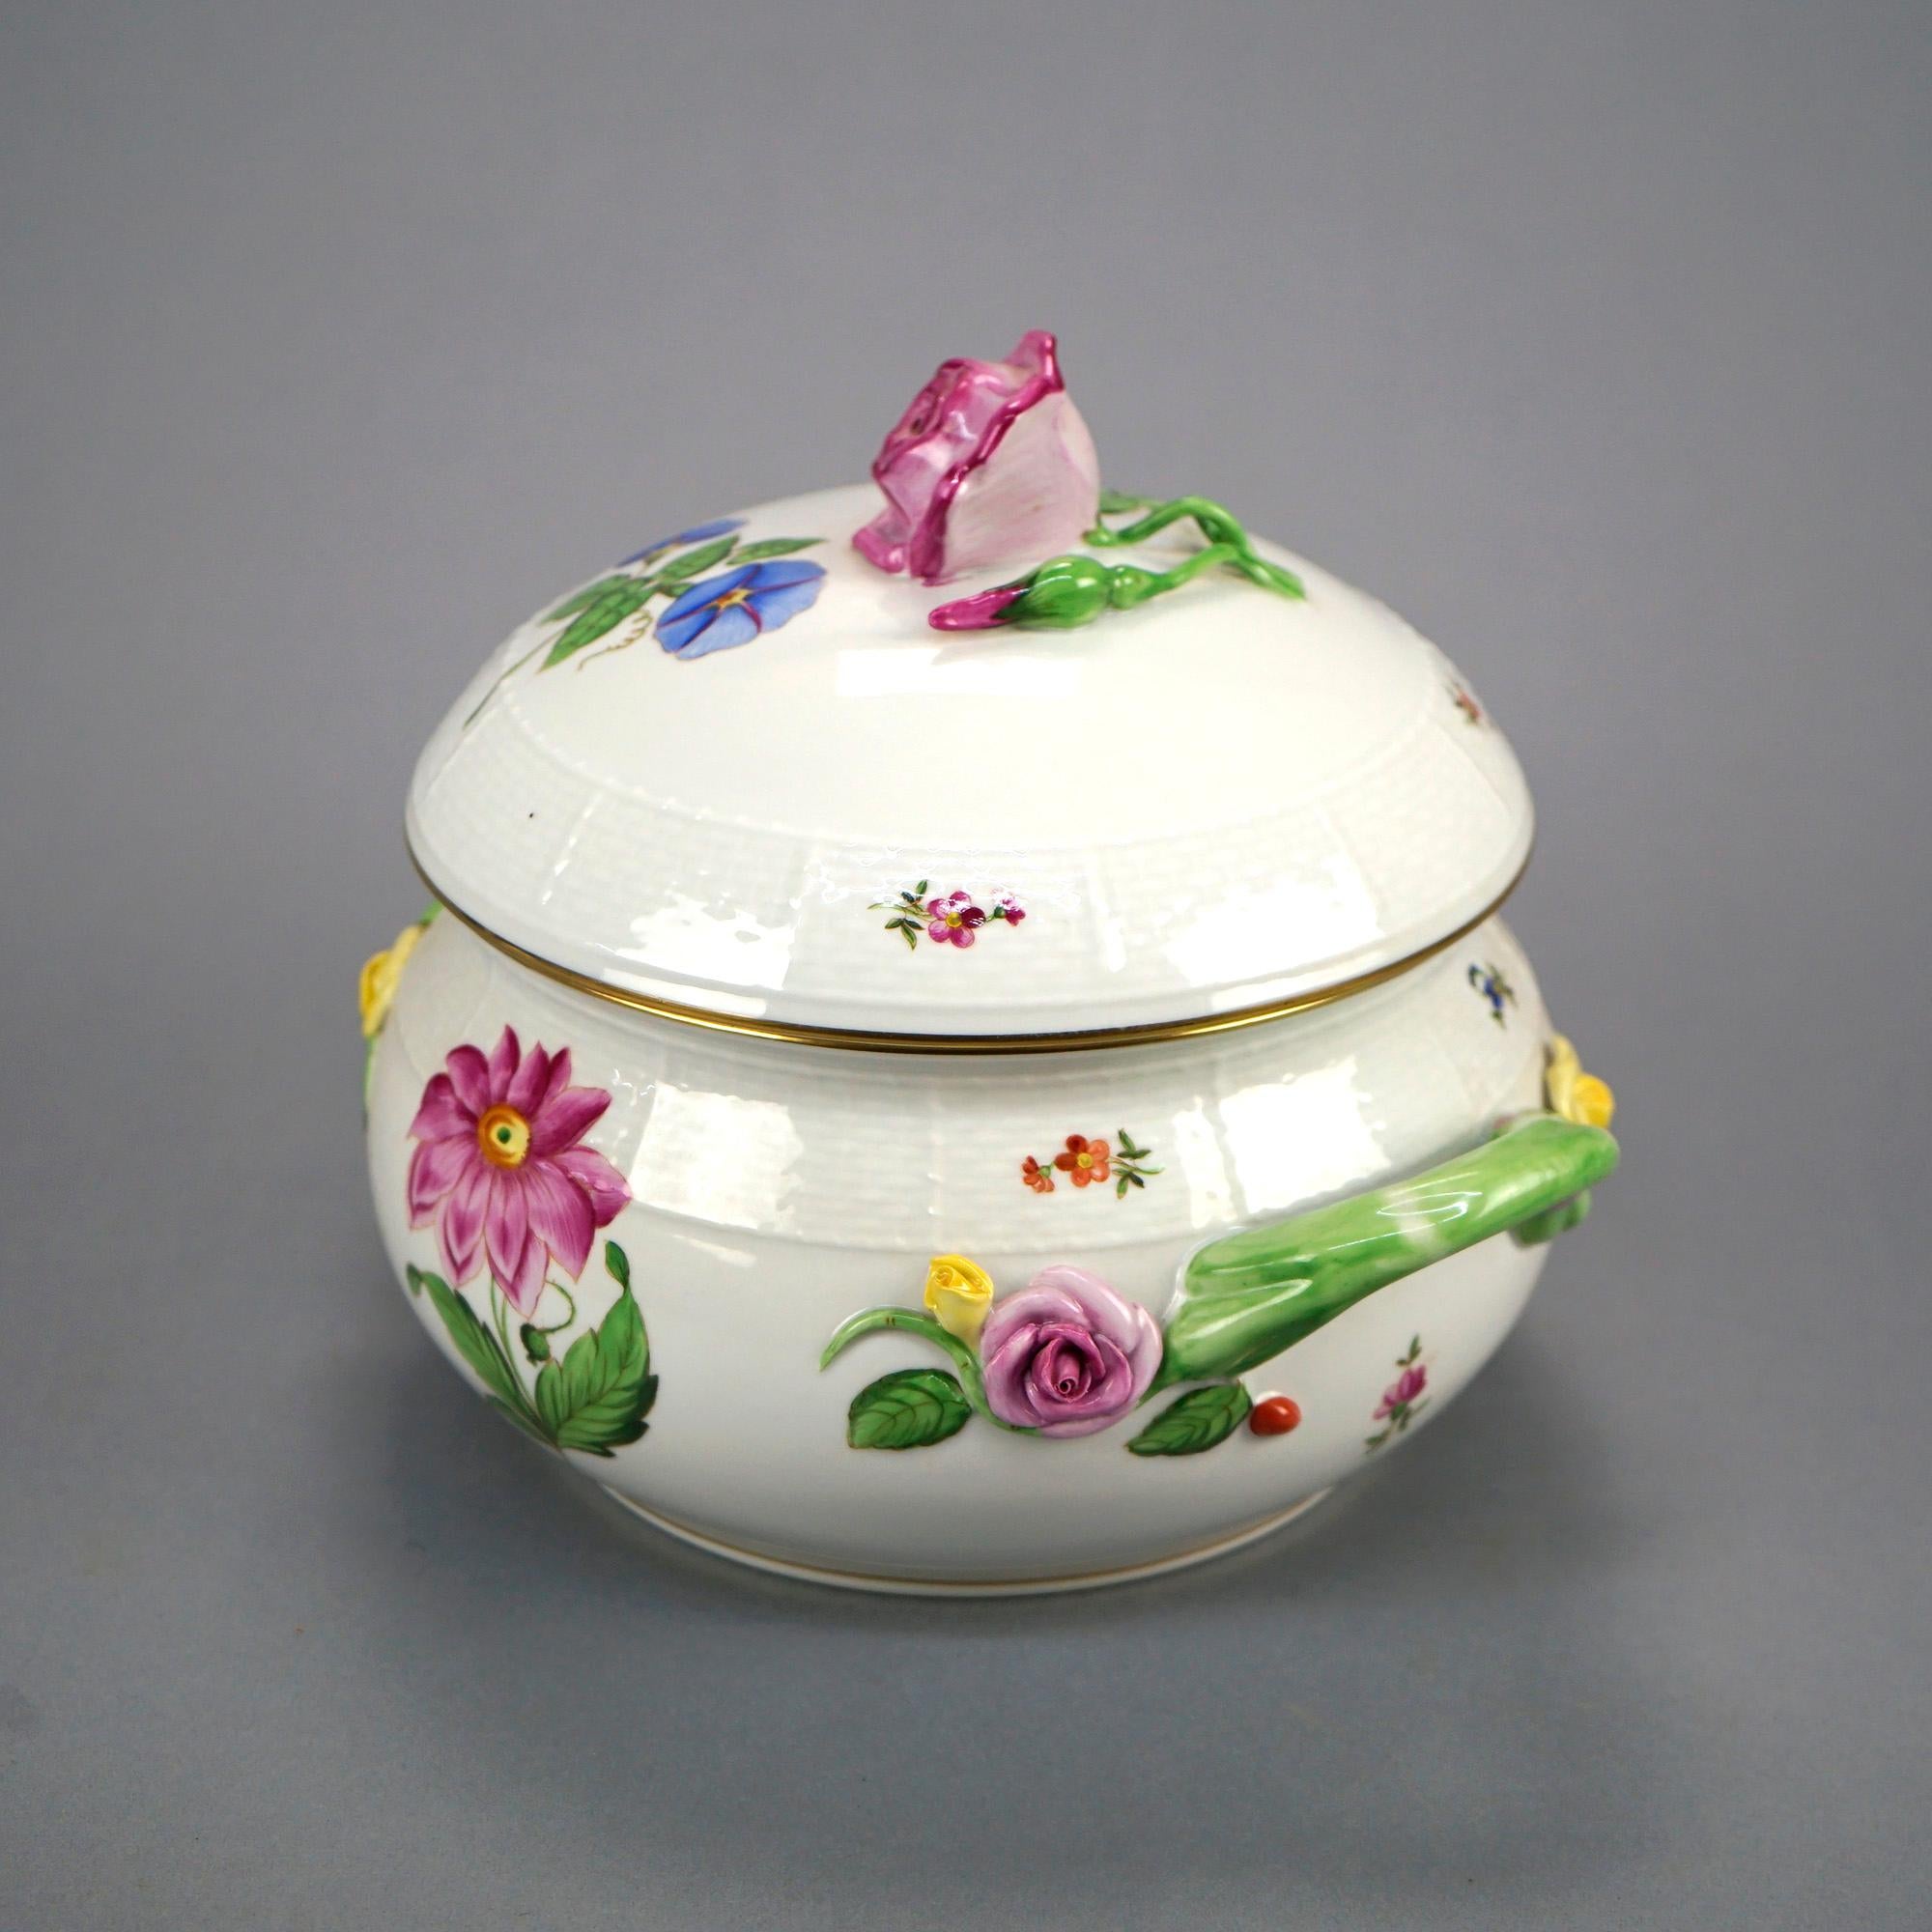 European Herend Porcelain Floral Decorated Covered Tureen with Applied Flowers, 20th C